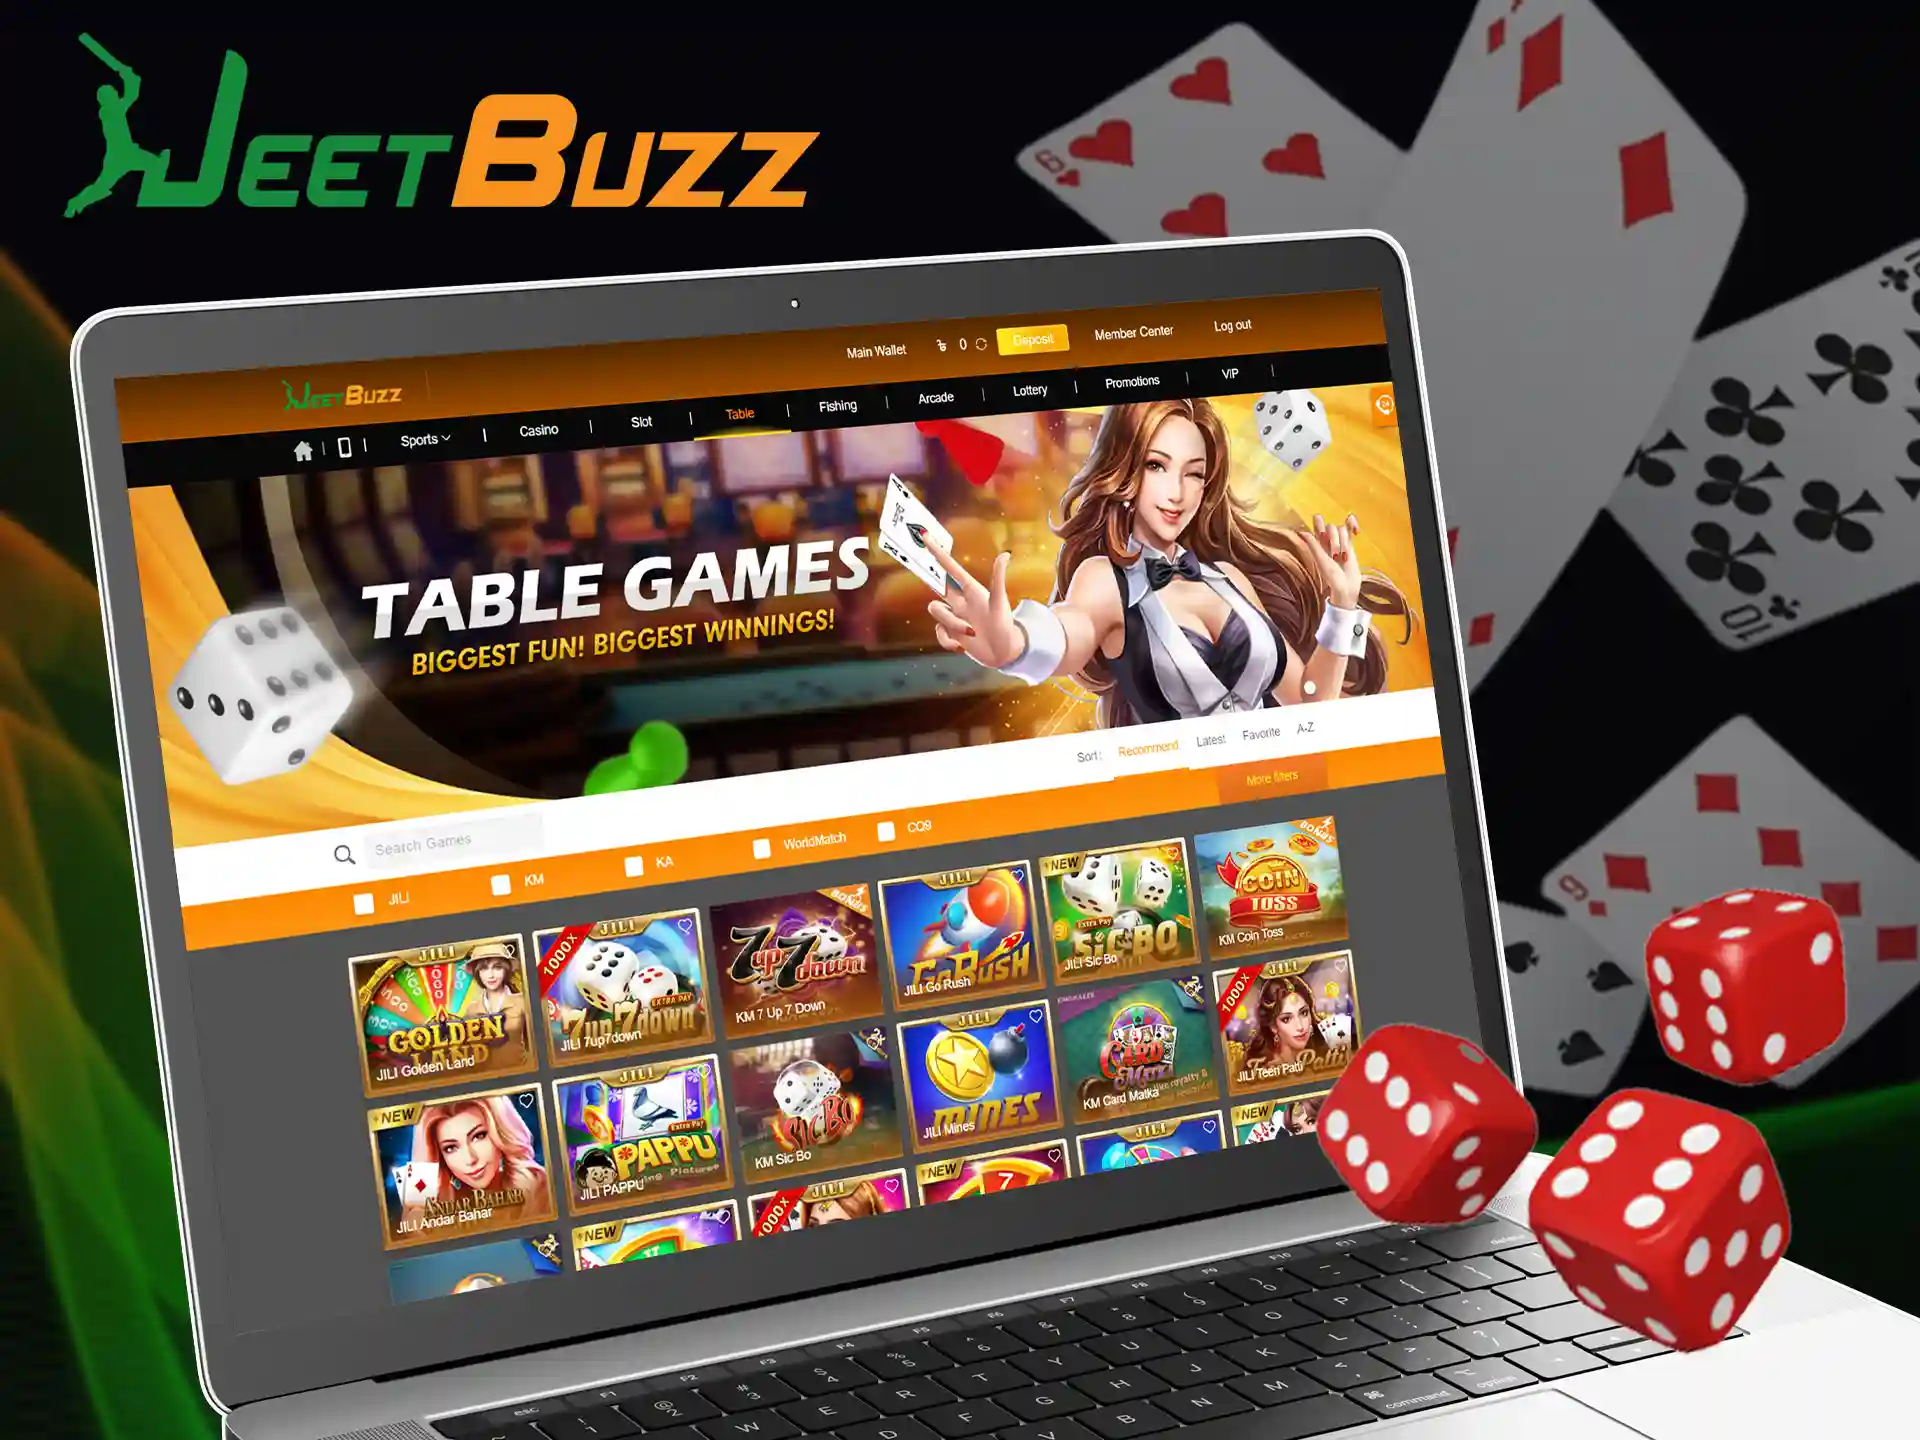 Play popular table games and win money at JeetBuzz.